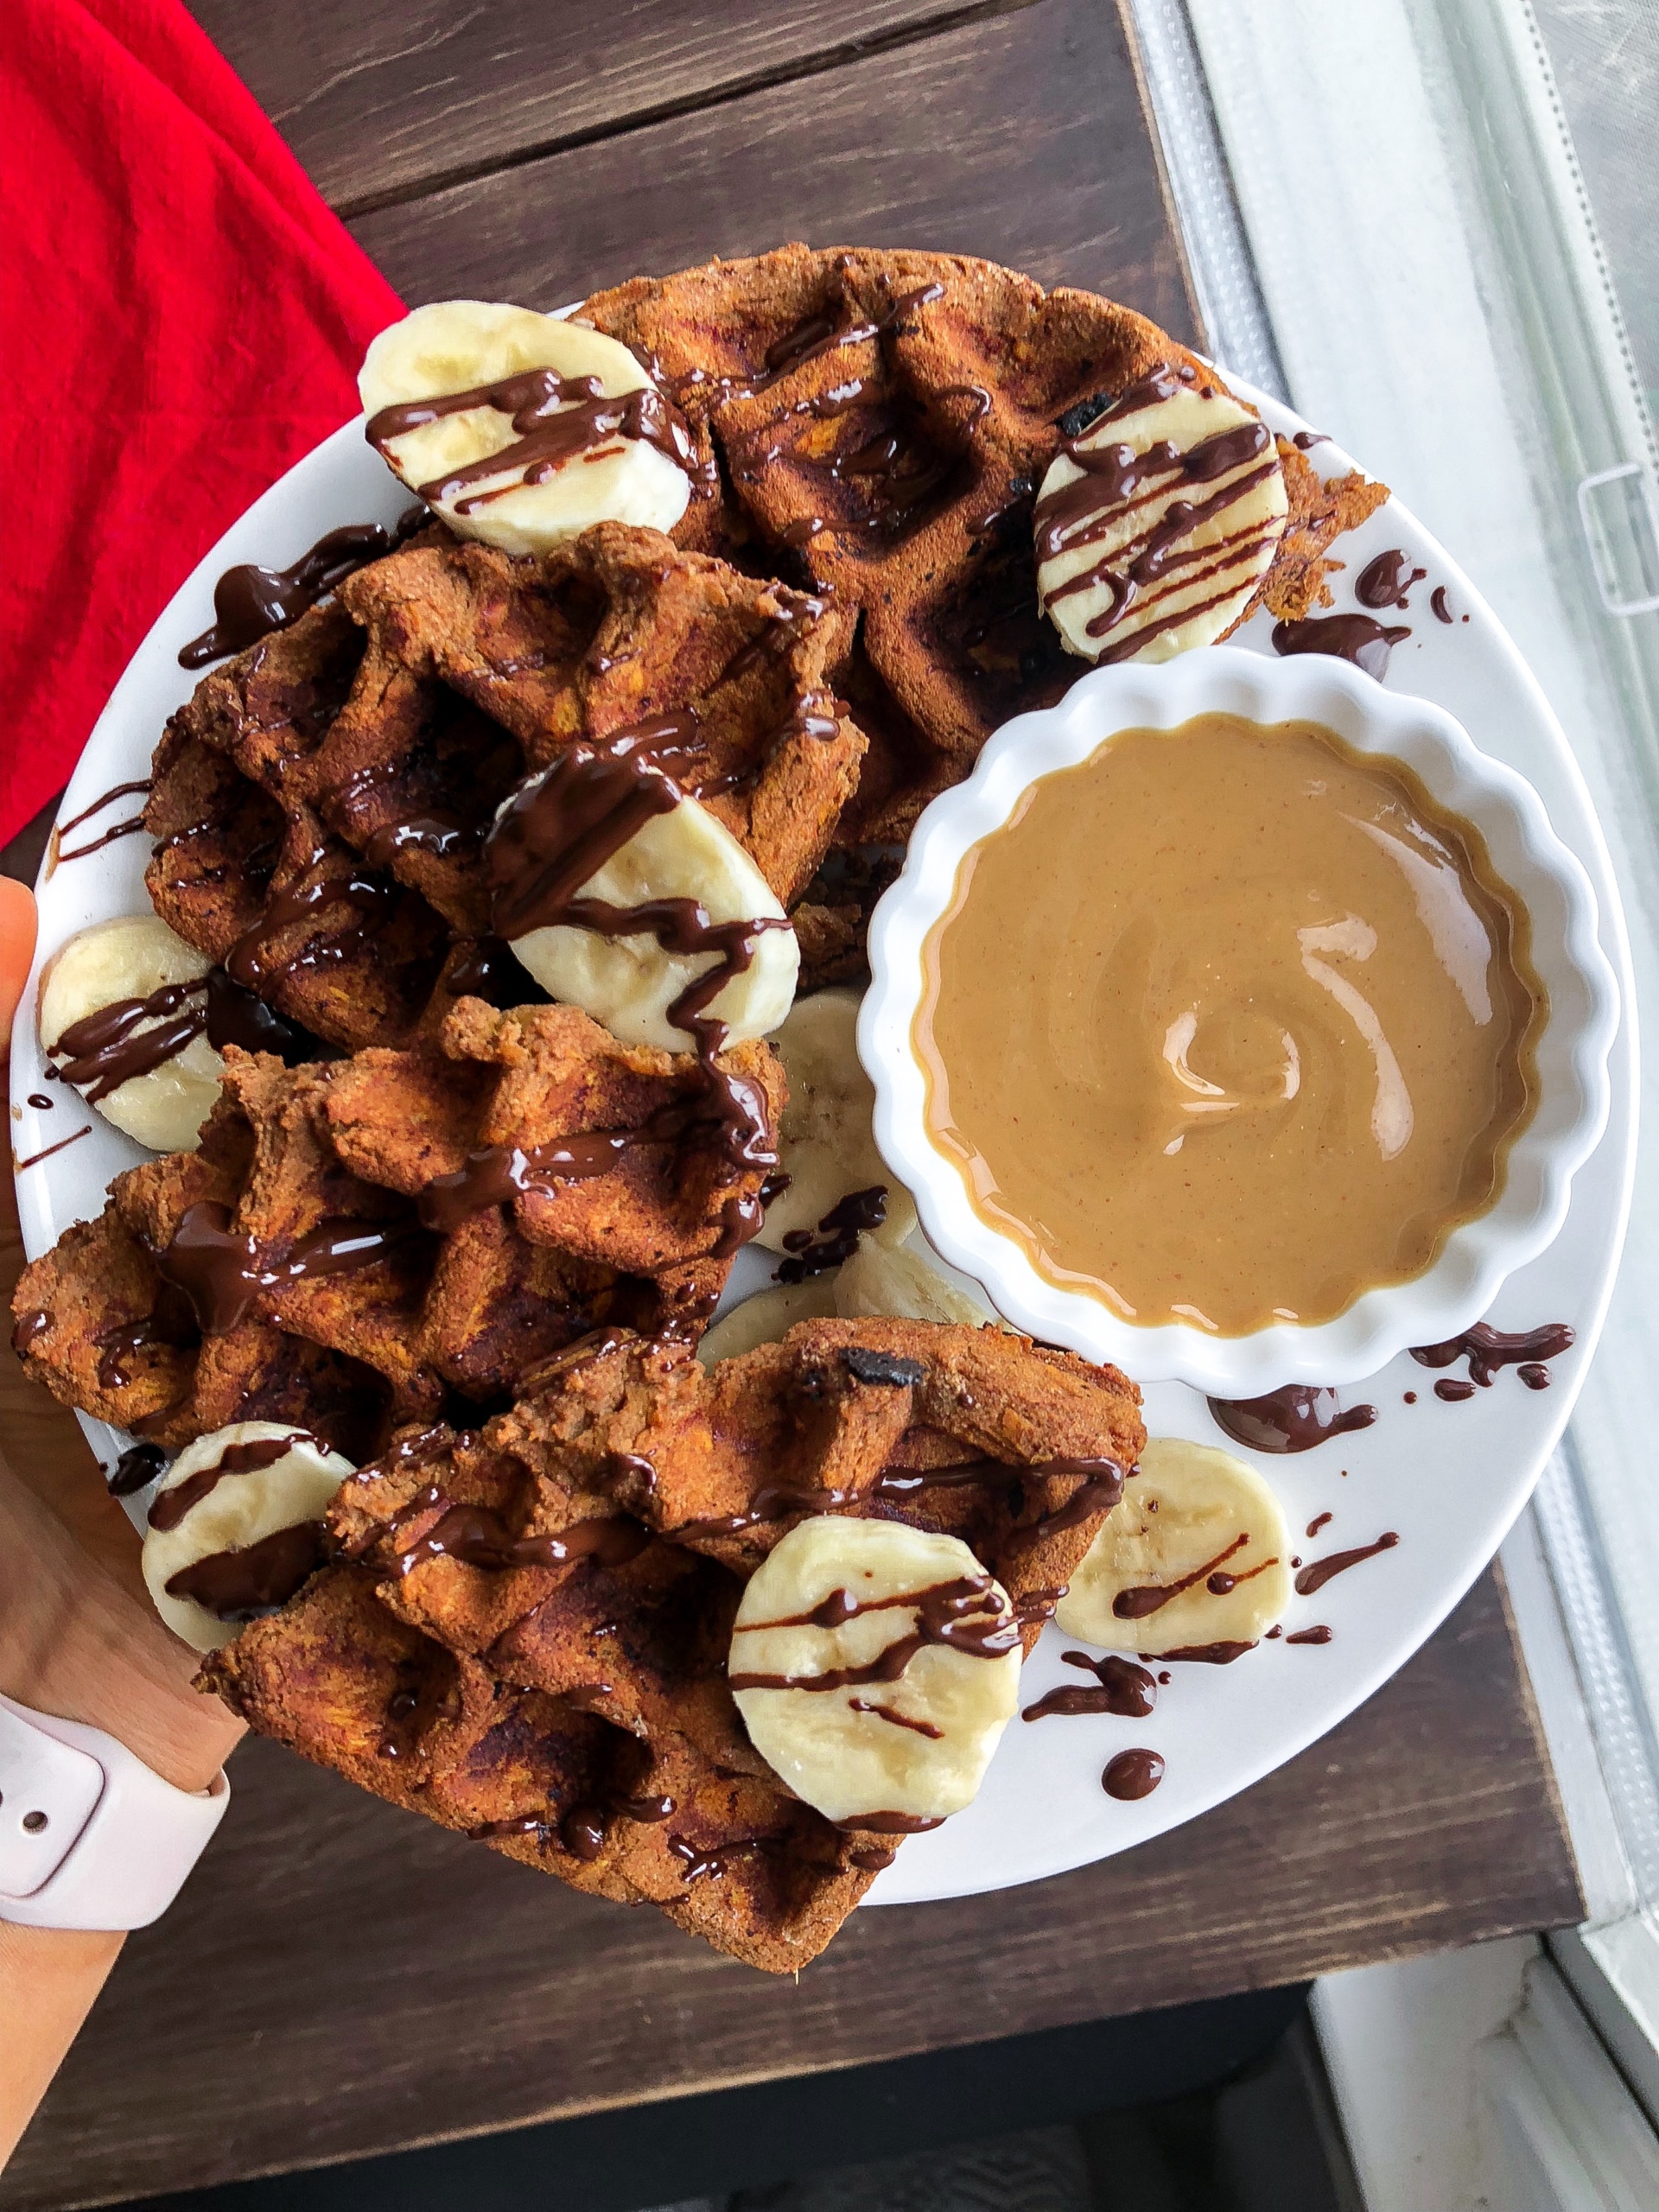 paleo sweet potato waffle on a white plate with cashew butter, bananas, and chocolate drizzled on top